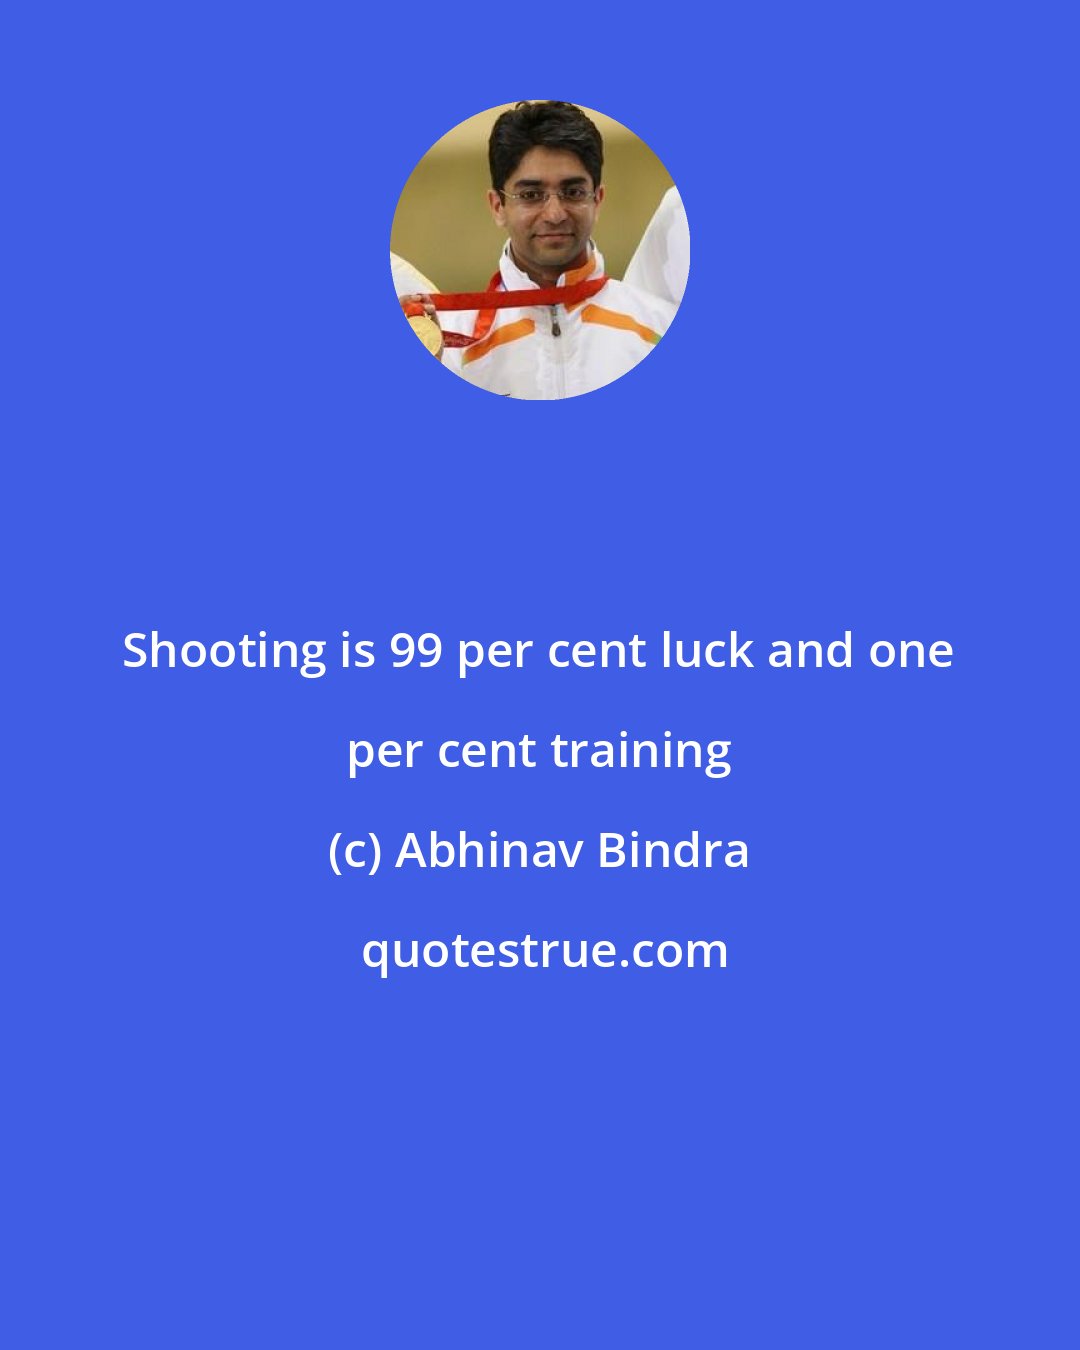 Abhinav Bindra: Shooting is 99 per cent luck and one per cent training